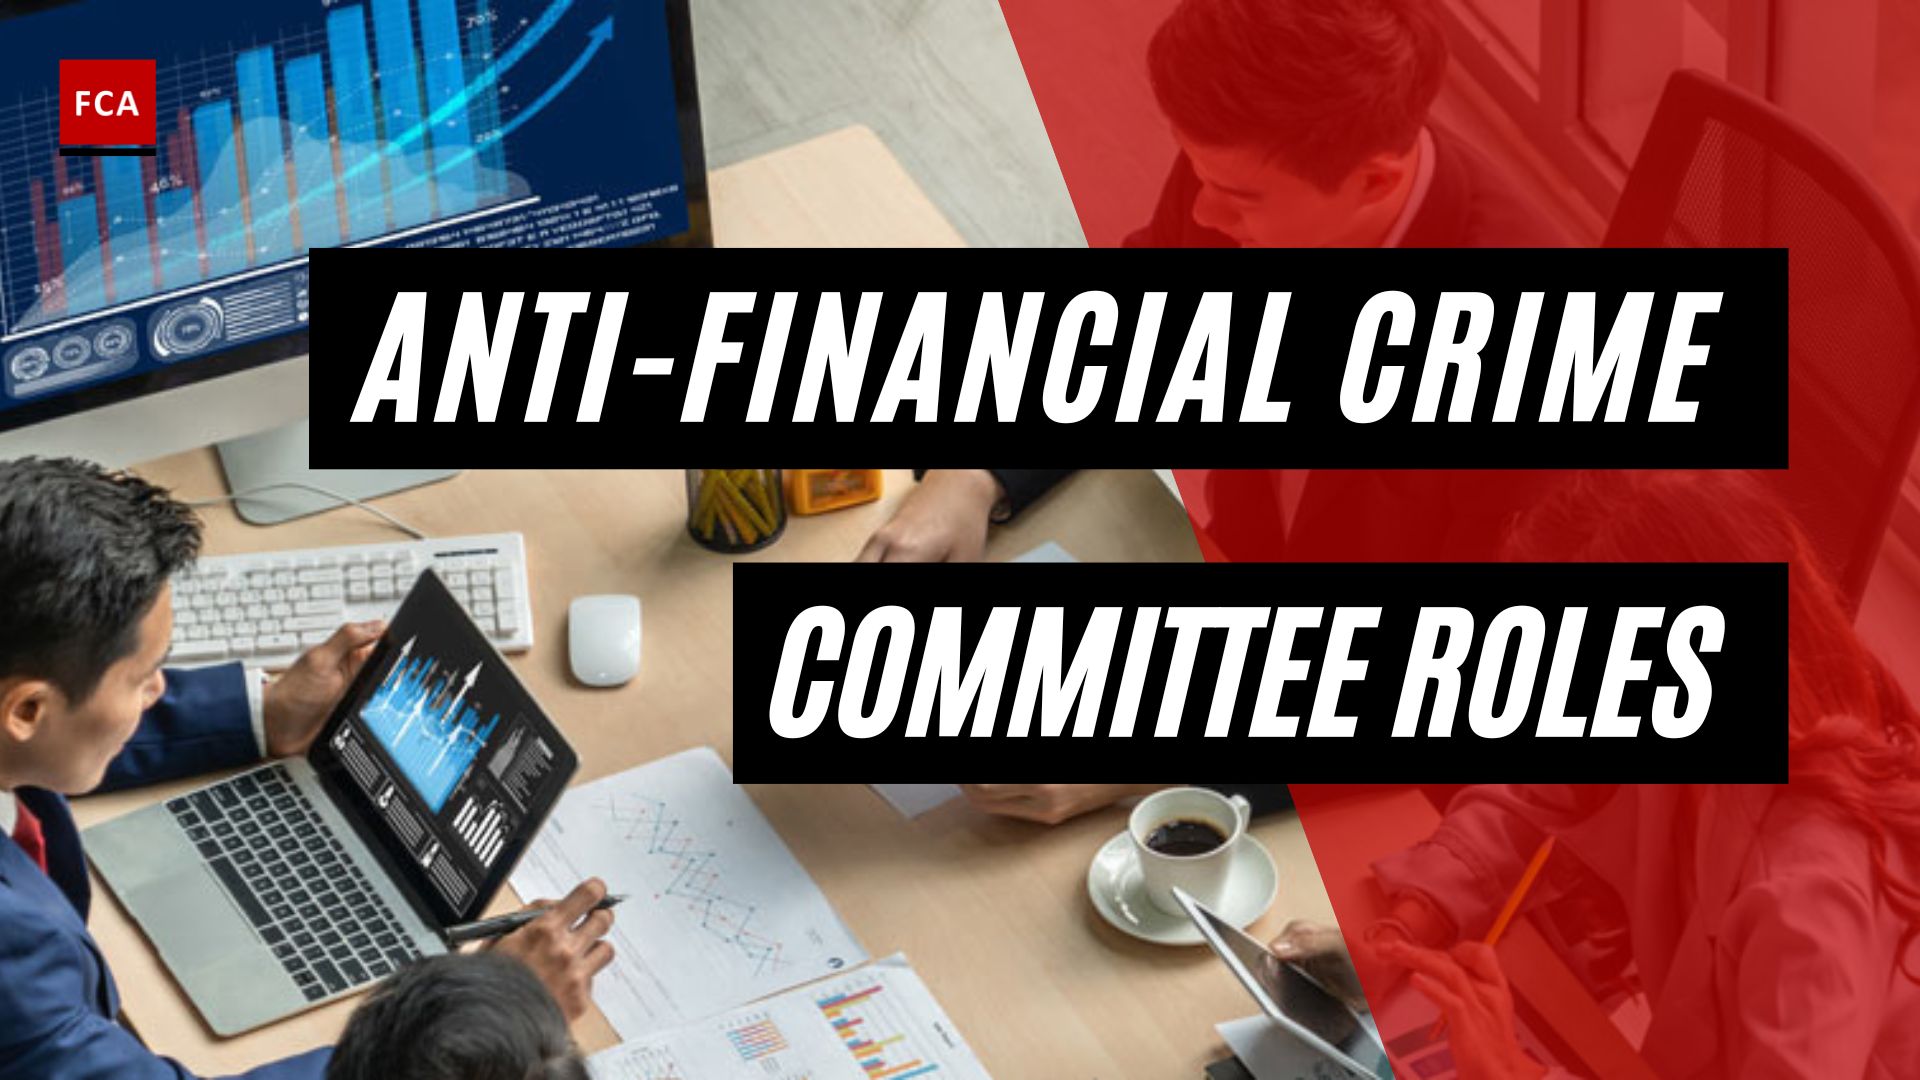 Anti-Financial Crime Committee